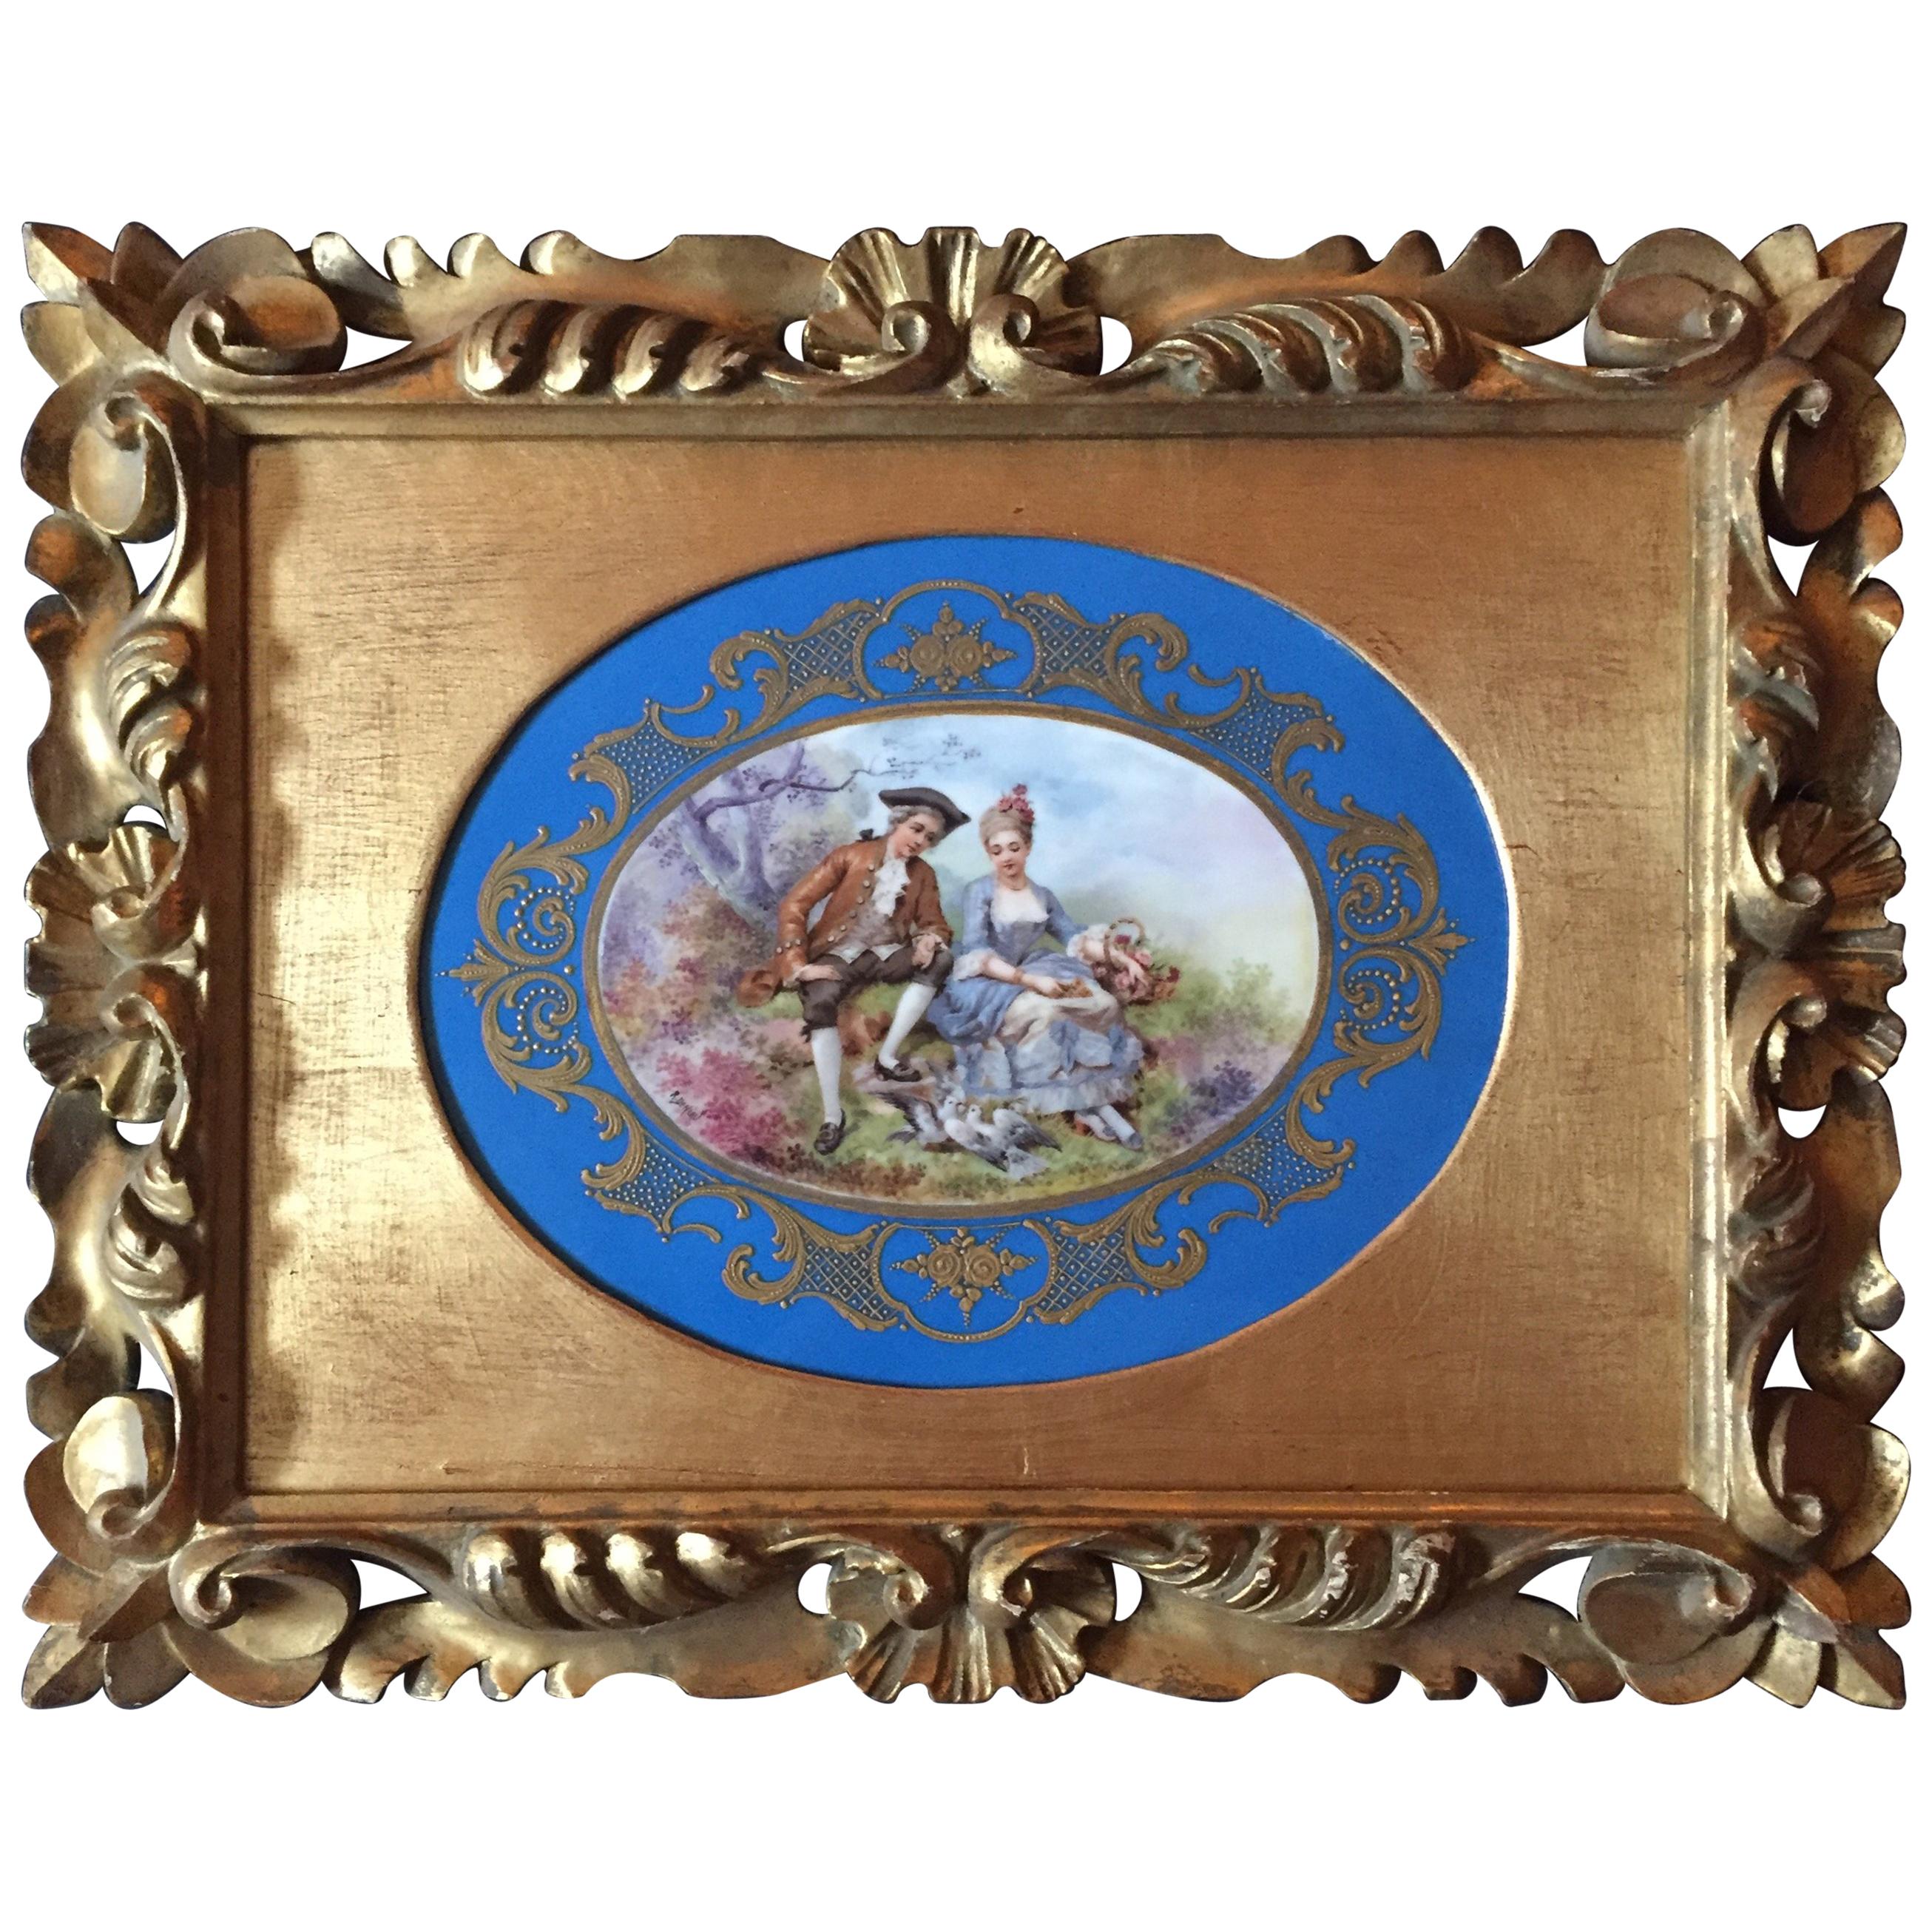 19th Century Unmarked Sevres Hand-Painted Porcelain Plaque, Hand Carved Frame